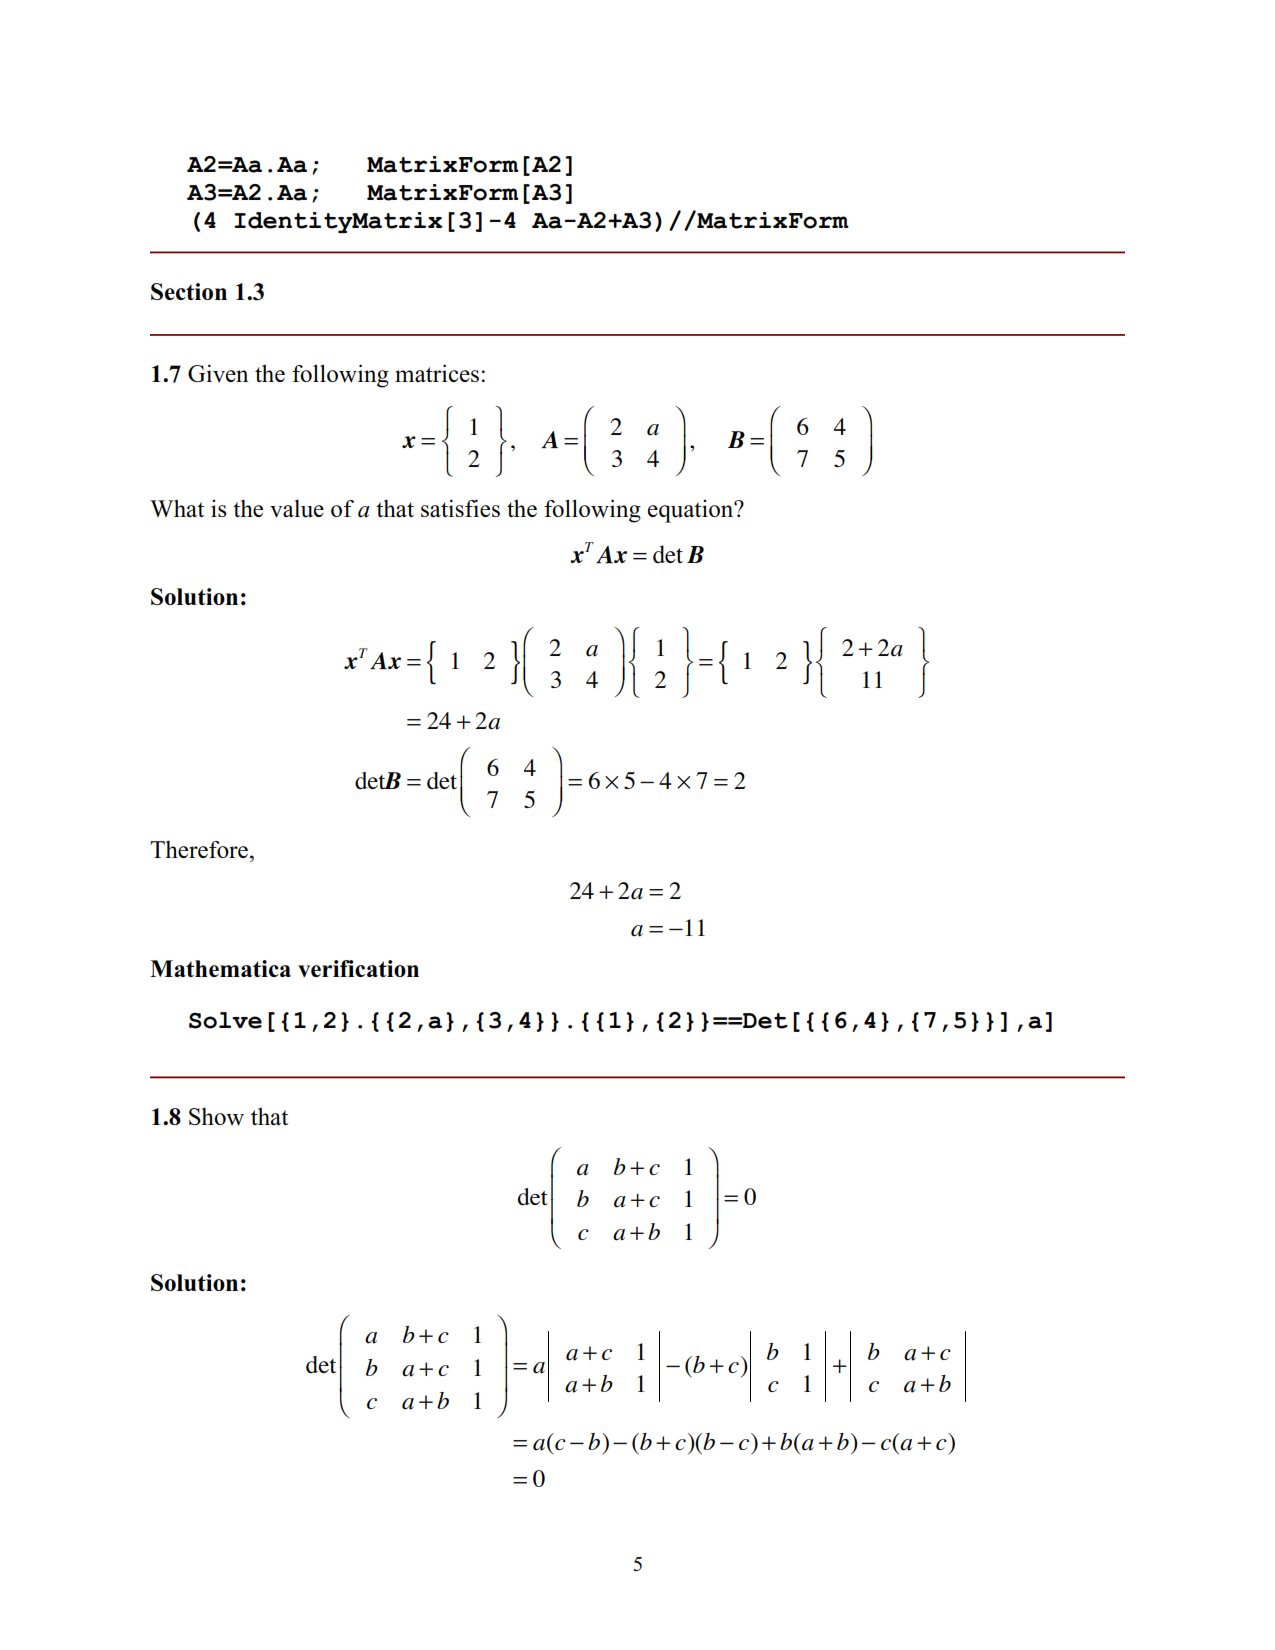 Download free advanced engineering mathematics with mathematica Edward B. Magrab solutions manual pdf | Gioumeh solution